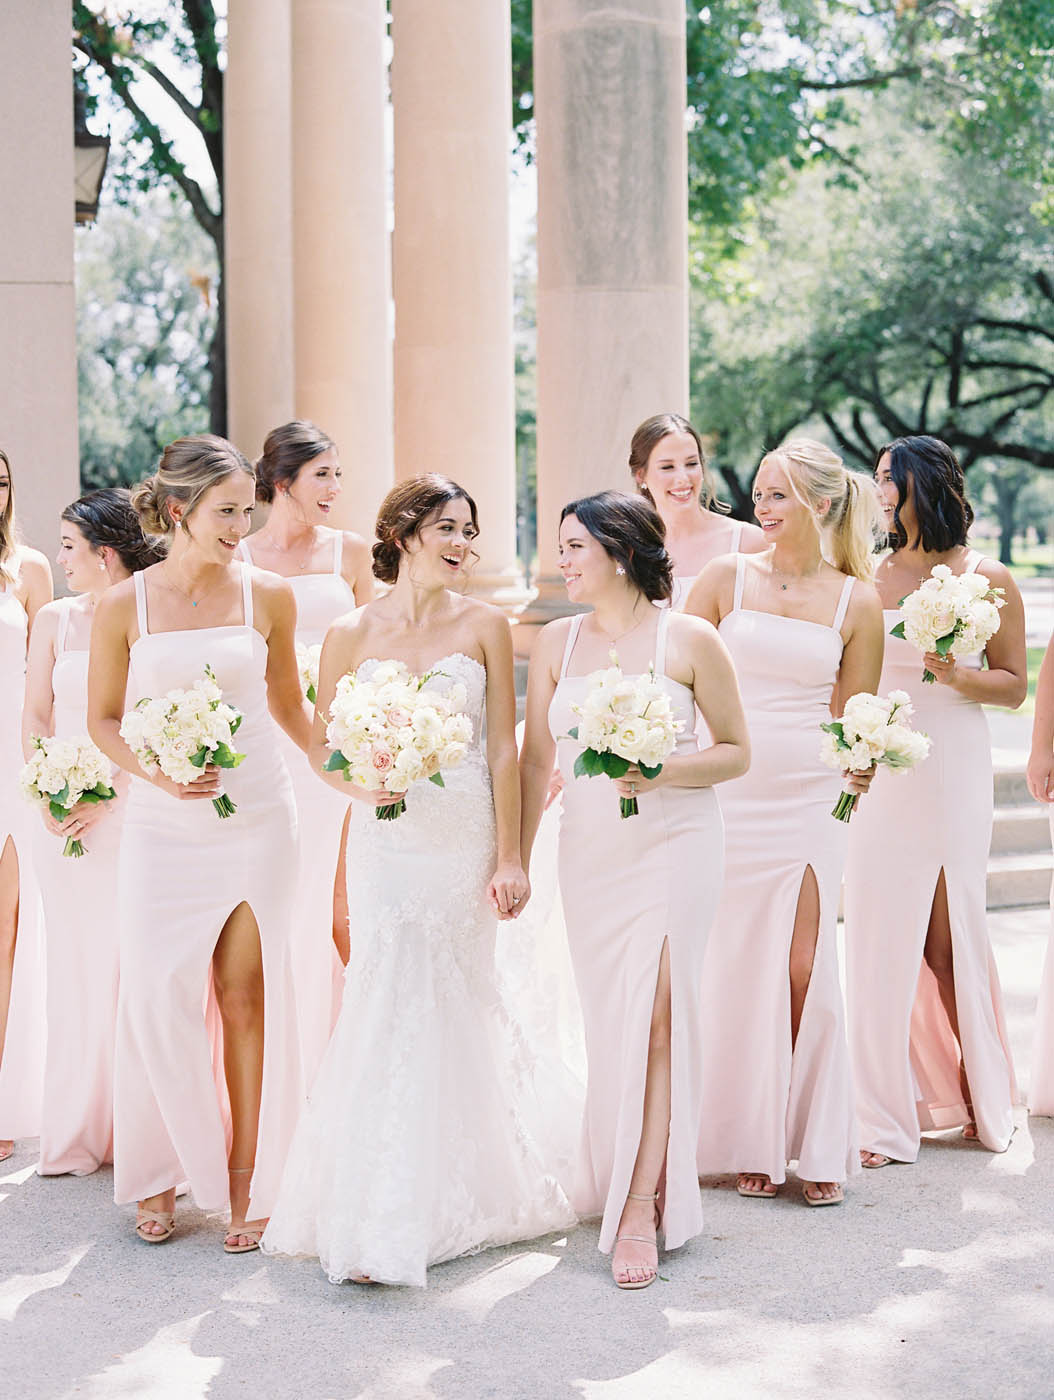 The bride walks with her bridesmaids who are wearing pink dresses